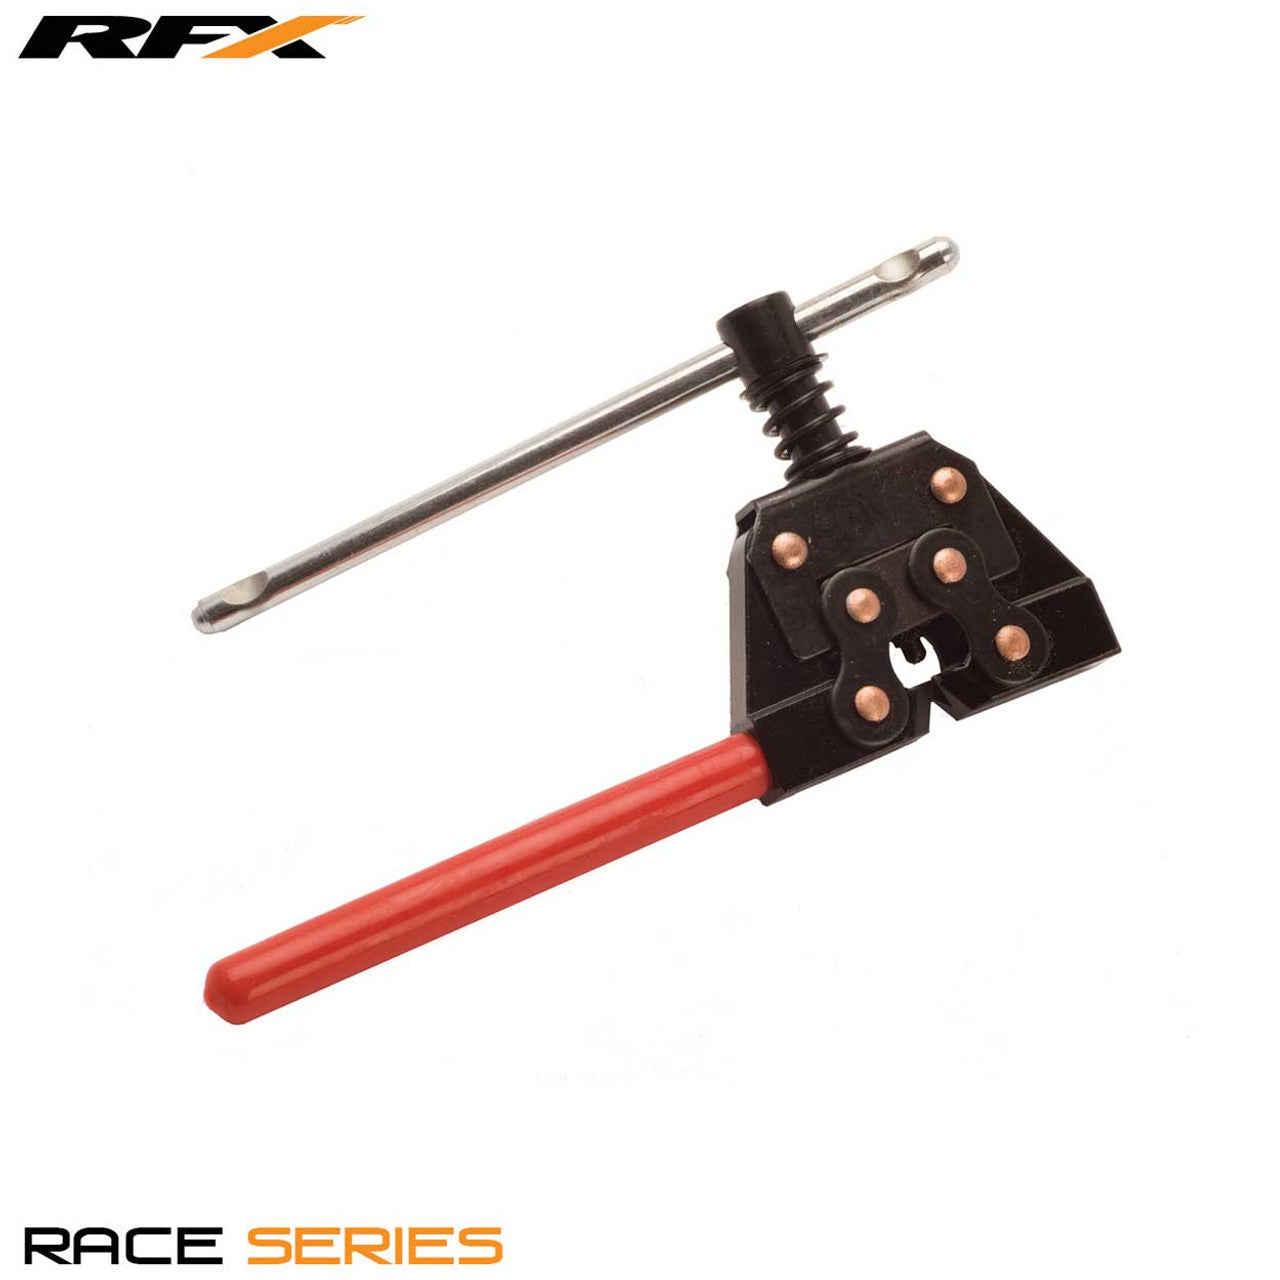 RFX Race Chain Breaker Standard Universal for use with 415-520 Chains